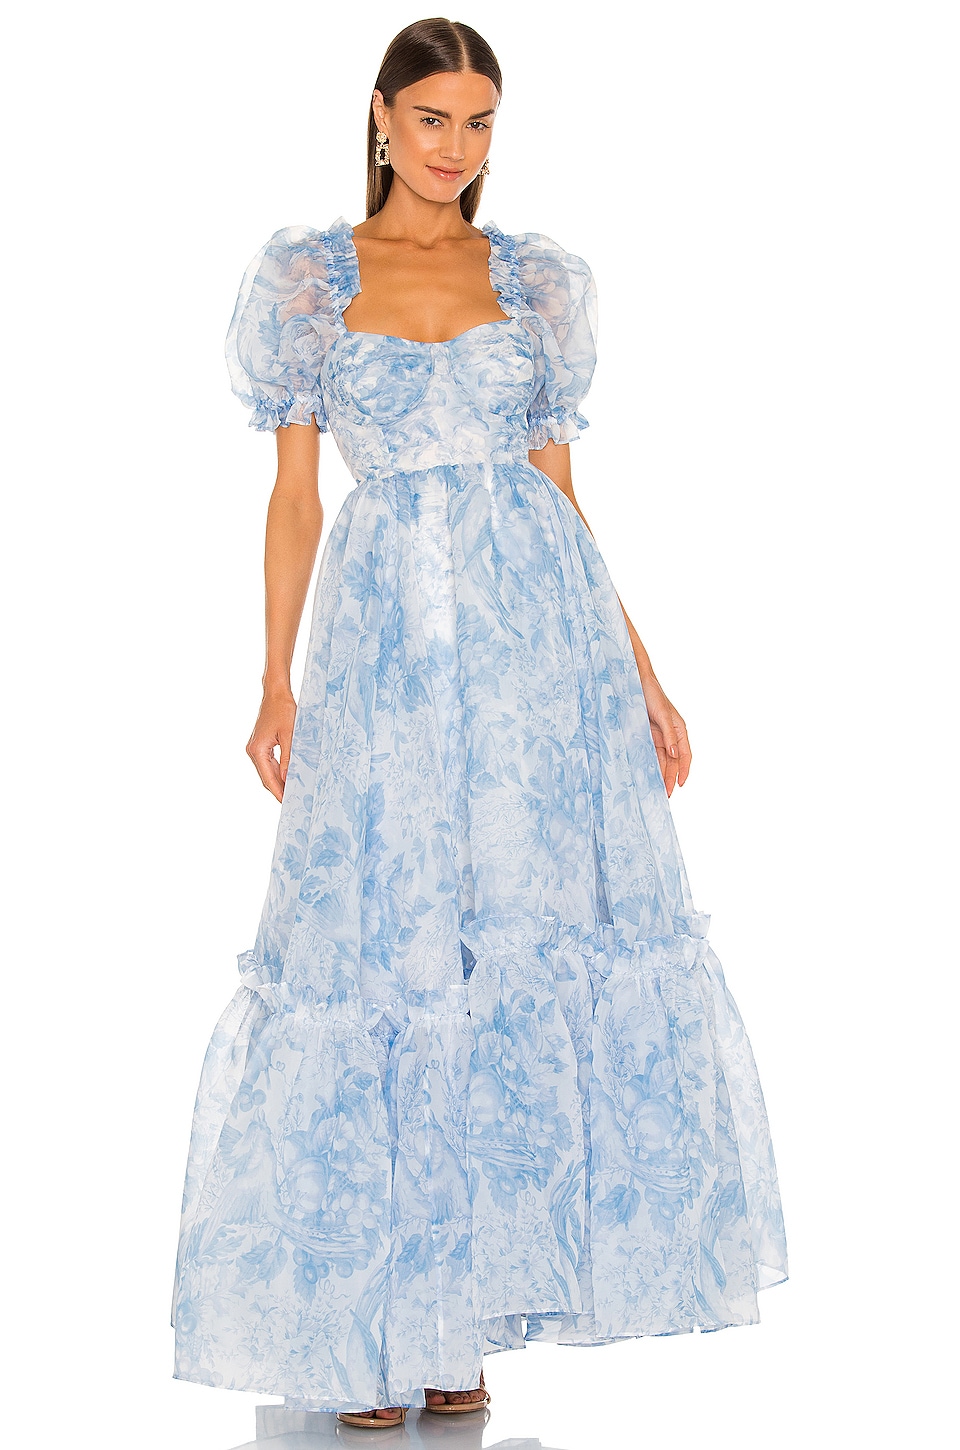 The Ritz Dress in Baby Blue Toile ...